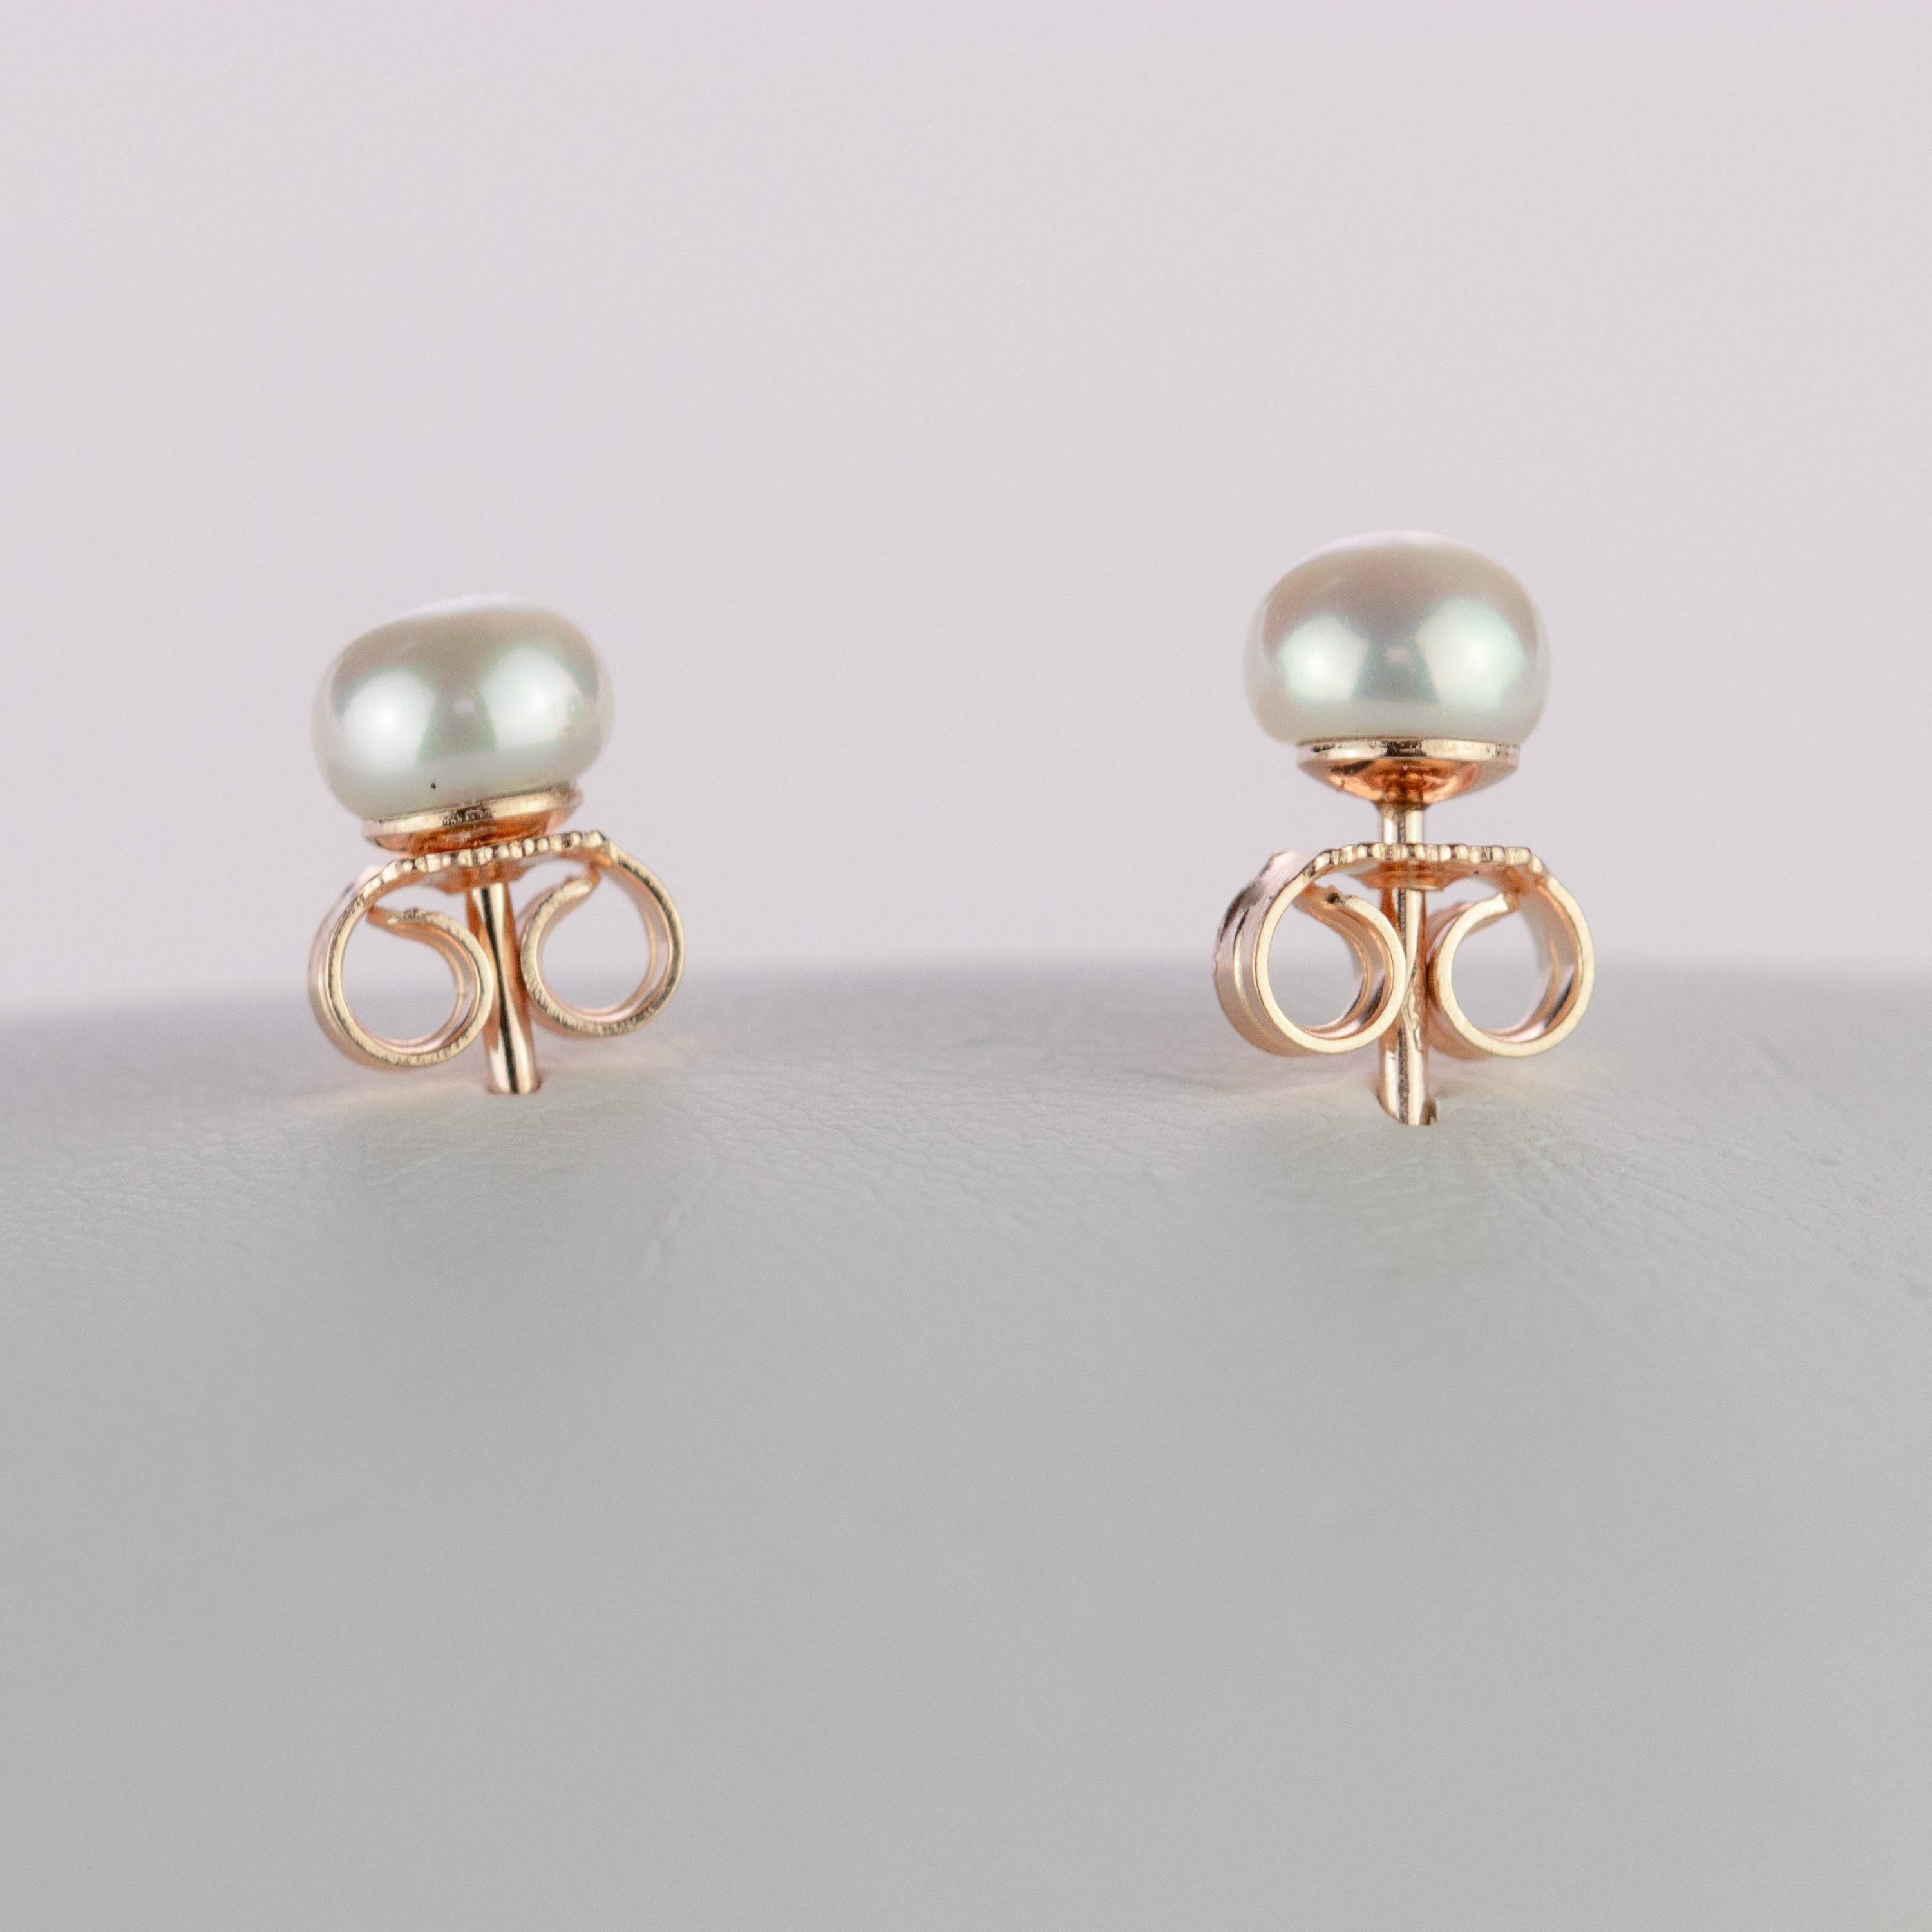 Italian crafted stud earrings. 18 karat rose gold natural freshwater pearl round 0.5 mm sea pearls. These pearls are inspired by the simplicity of natural beauty. With a perfect size, it will fill with light the face of those who wear them. The